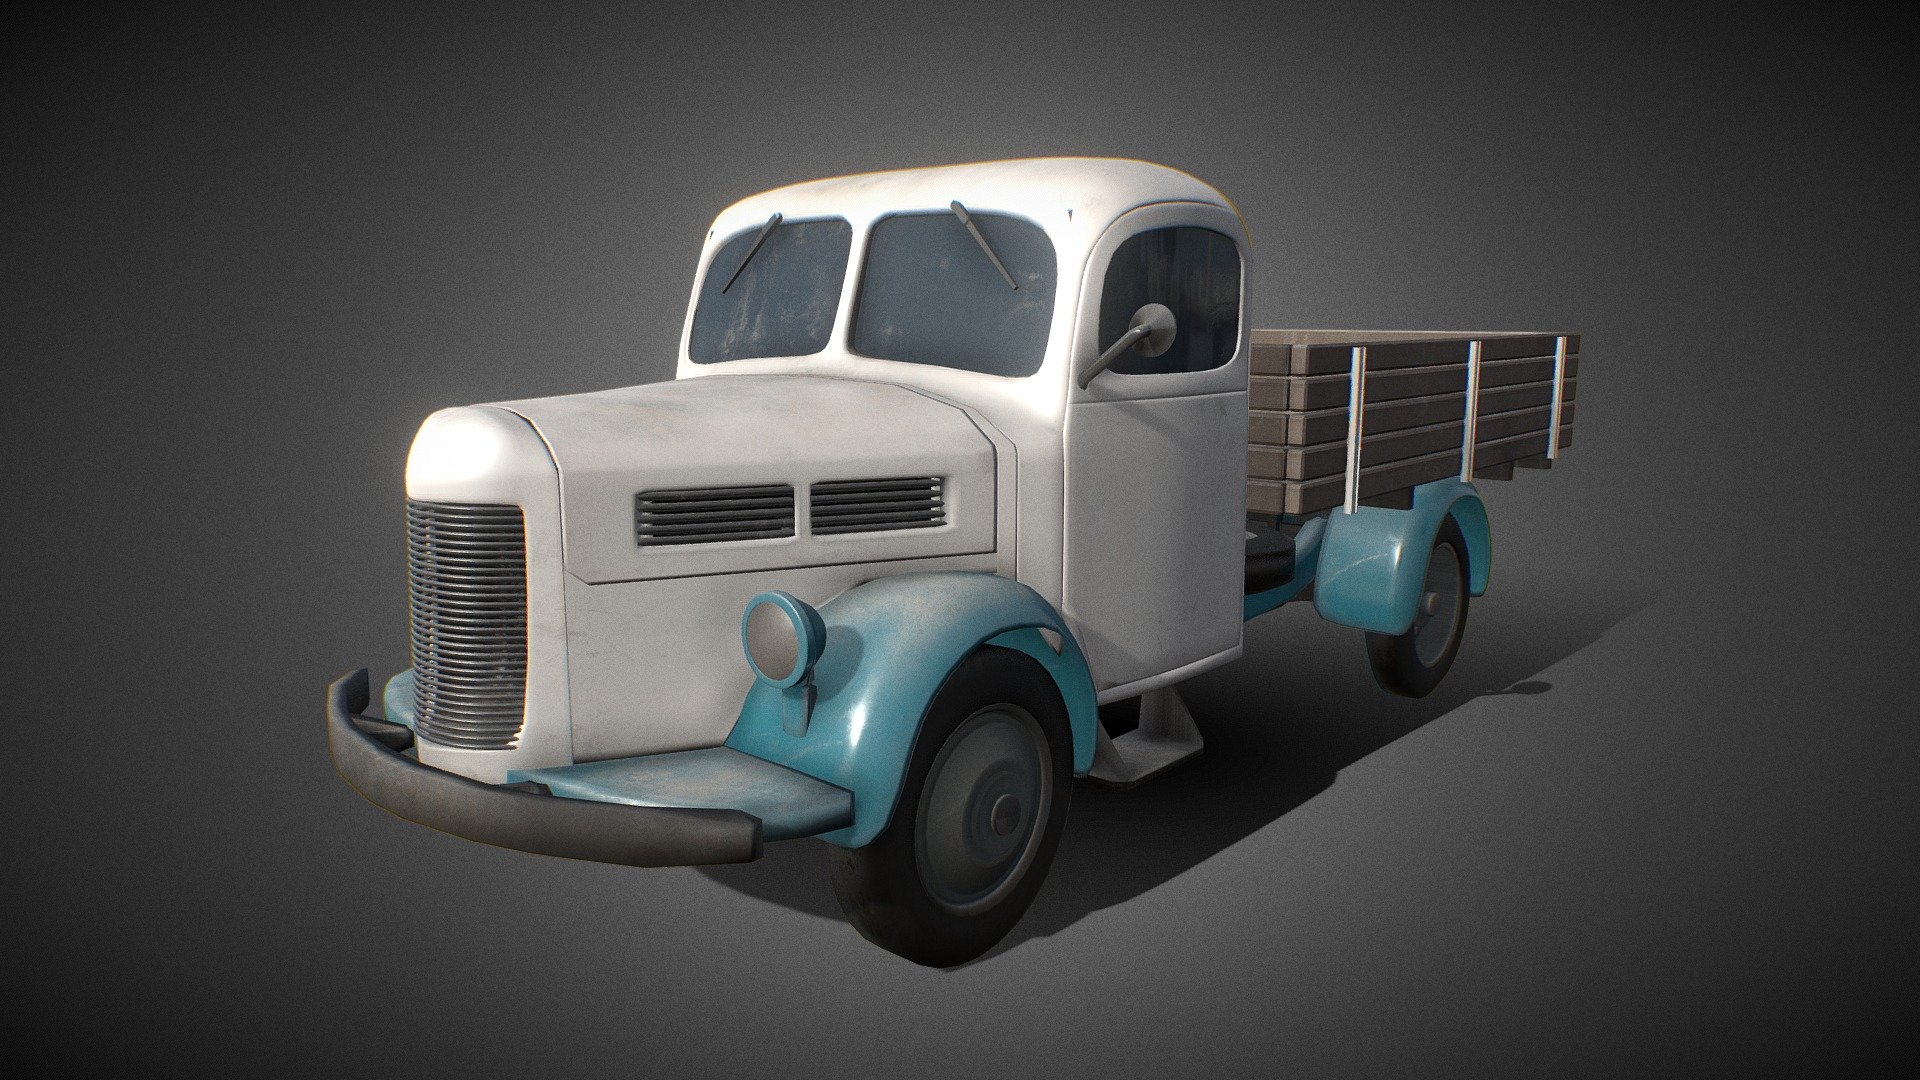 Skoda 150 modeled in a Blender 3d .

I made the textures in quixel mixer. Tested it in unreal engine 5

has :

4k Texture (PBR) 9 materials,

6 kinds of colors,

UVs,

doesn't have :

doesnt have rig,

doesnt have engine,

doesnt have driver's cabin,

25 000 Vertices ! formats: -blend -obj -fbx -dae - Old truck Skoda 150 - Buy Royalty Free 3D model by vojtech.vejtasa 3d model